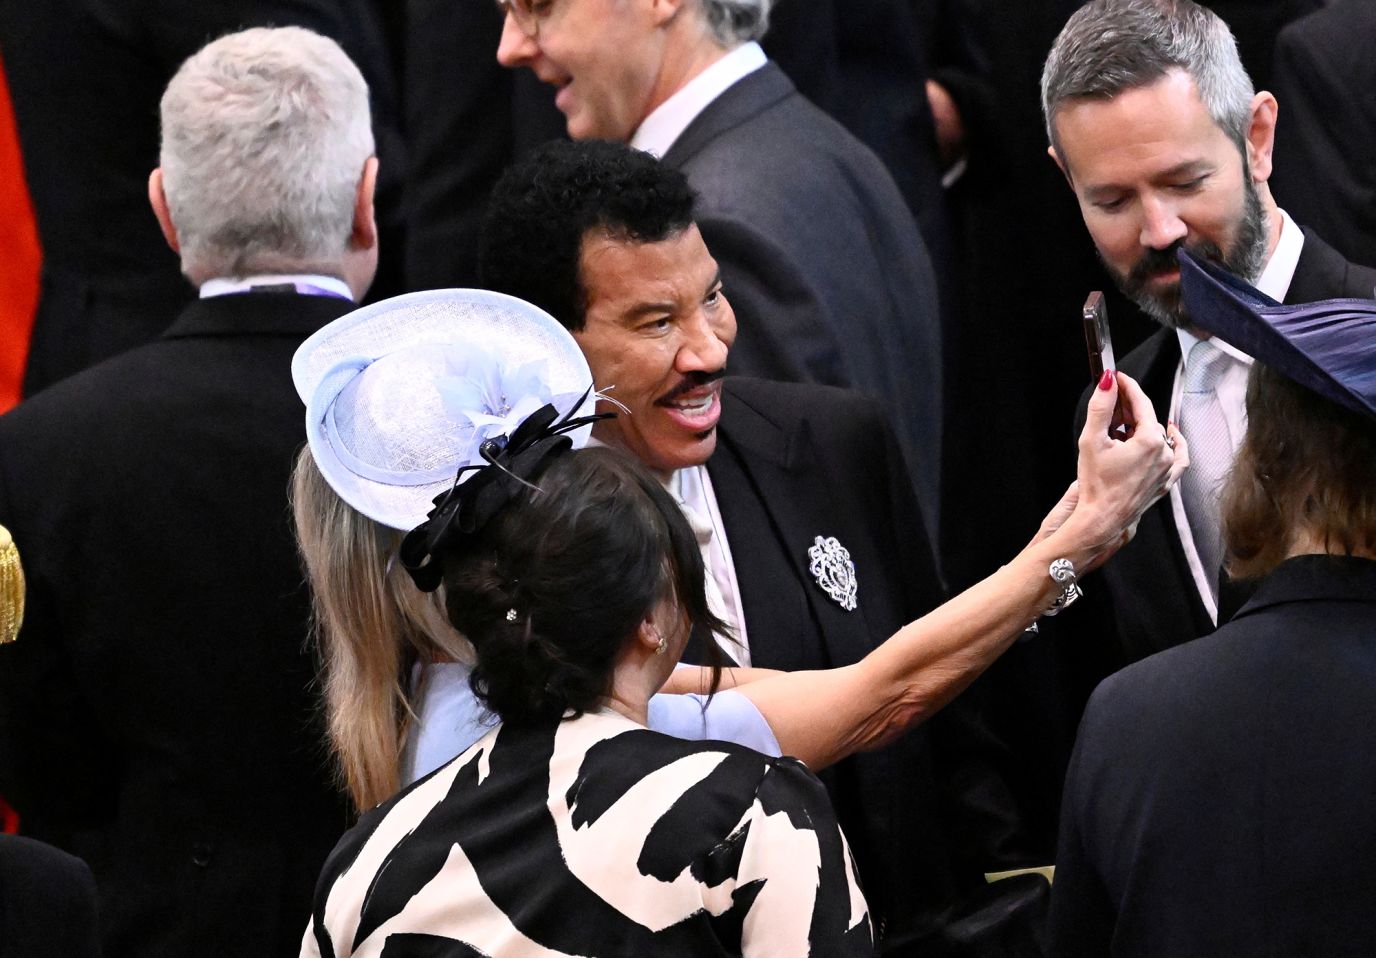 Singer Lionel Richie poses for a selfie at Westminster Abbey. The coronation guests include <a href='https://www.cnn.com/uk/live-news/king-charles-iii-coronation-ckc-intl-gbr/h_6381e2bc126c139f48714994a44b7510' target='_blank'>celebrities and world leaders</a>.